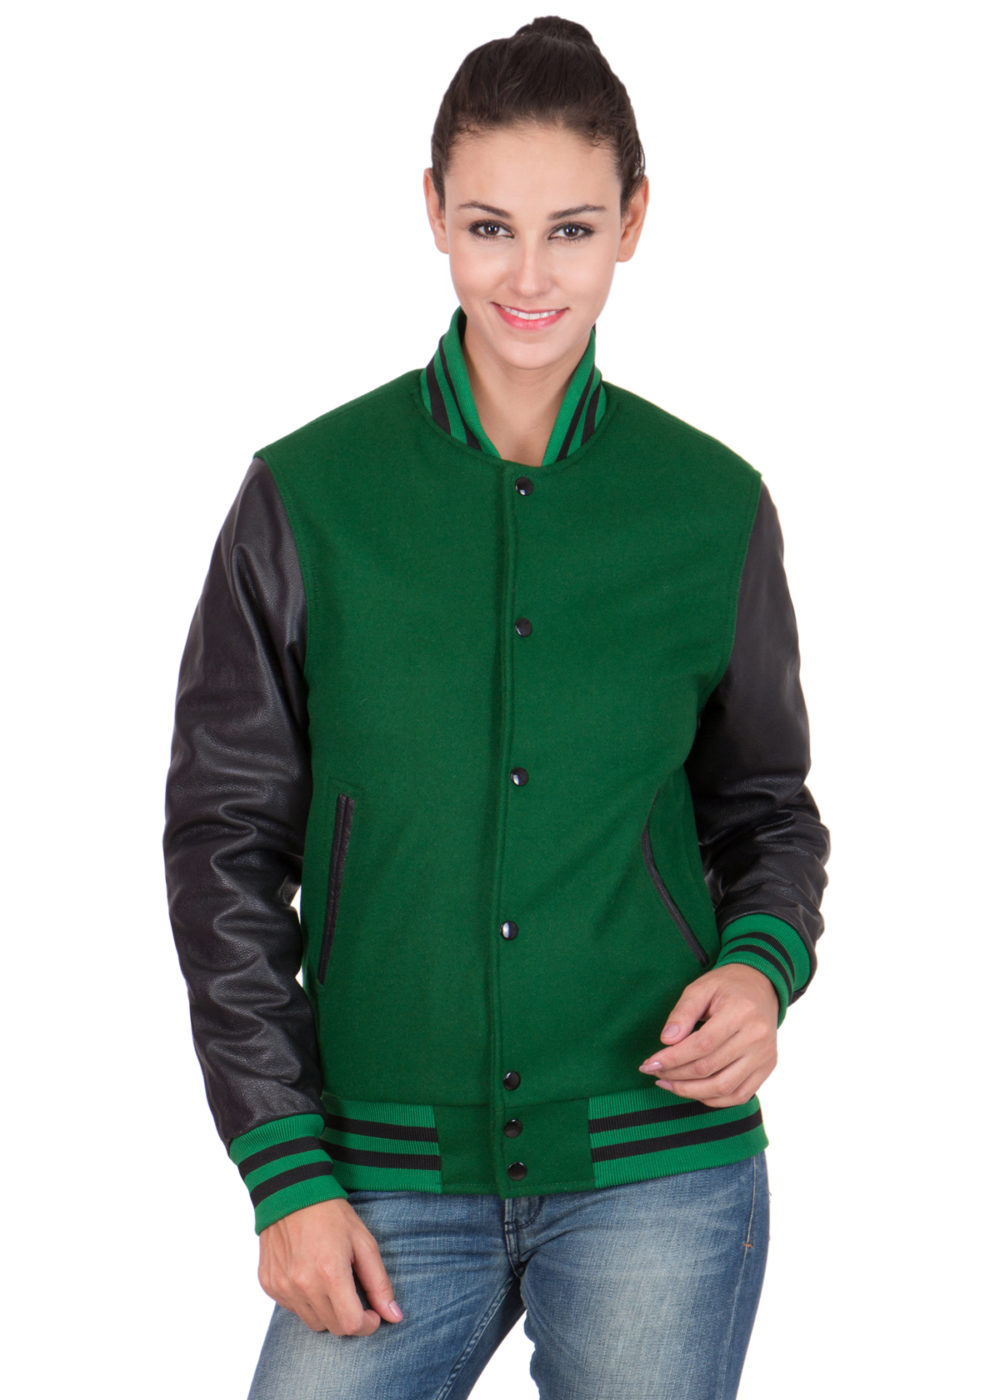 Kelly Green Letterman Jacket with White Leather Sleeves